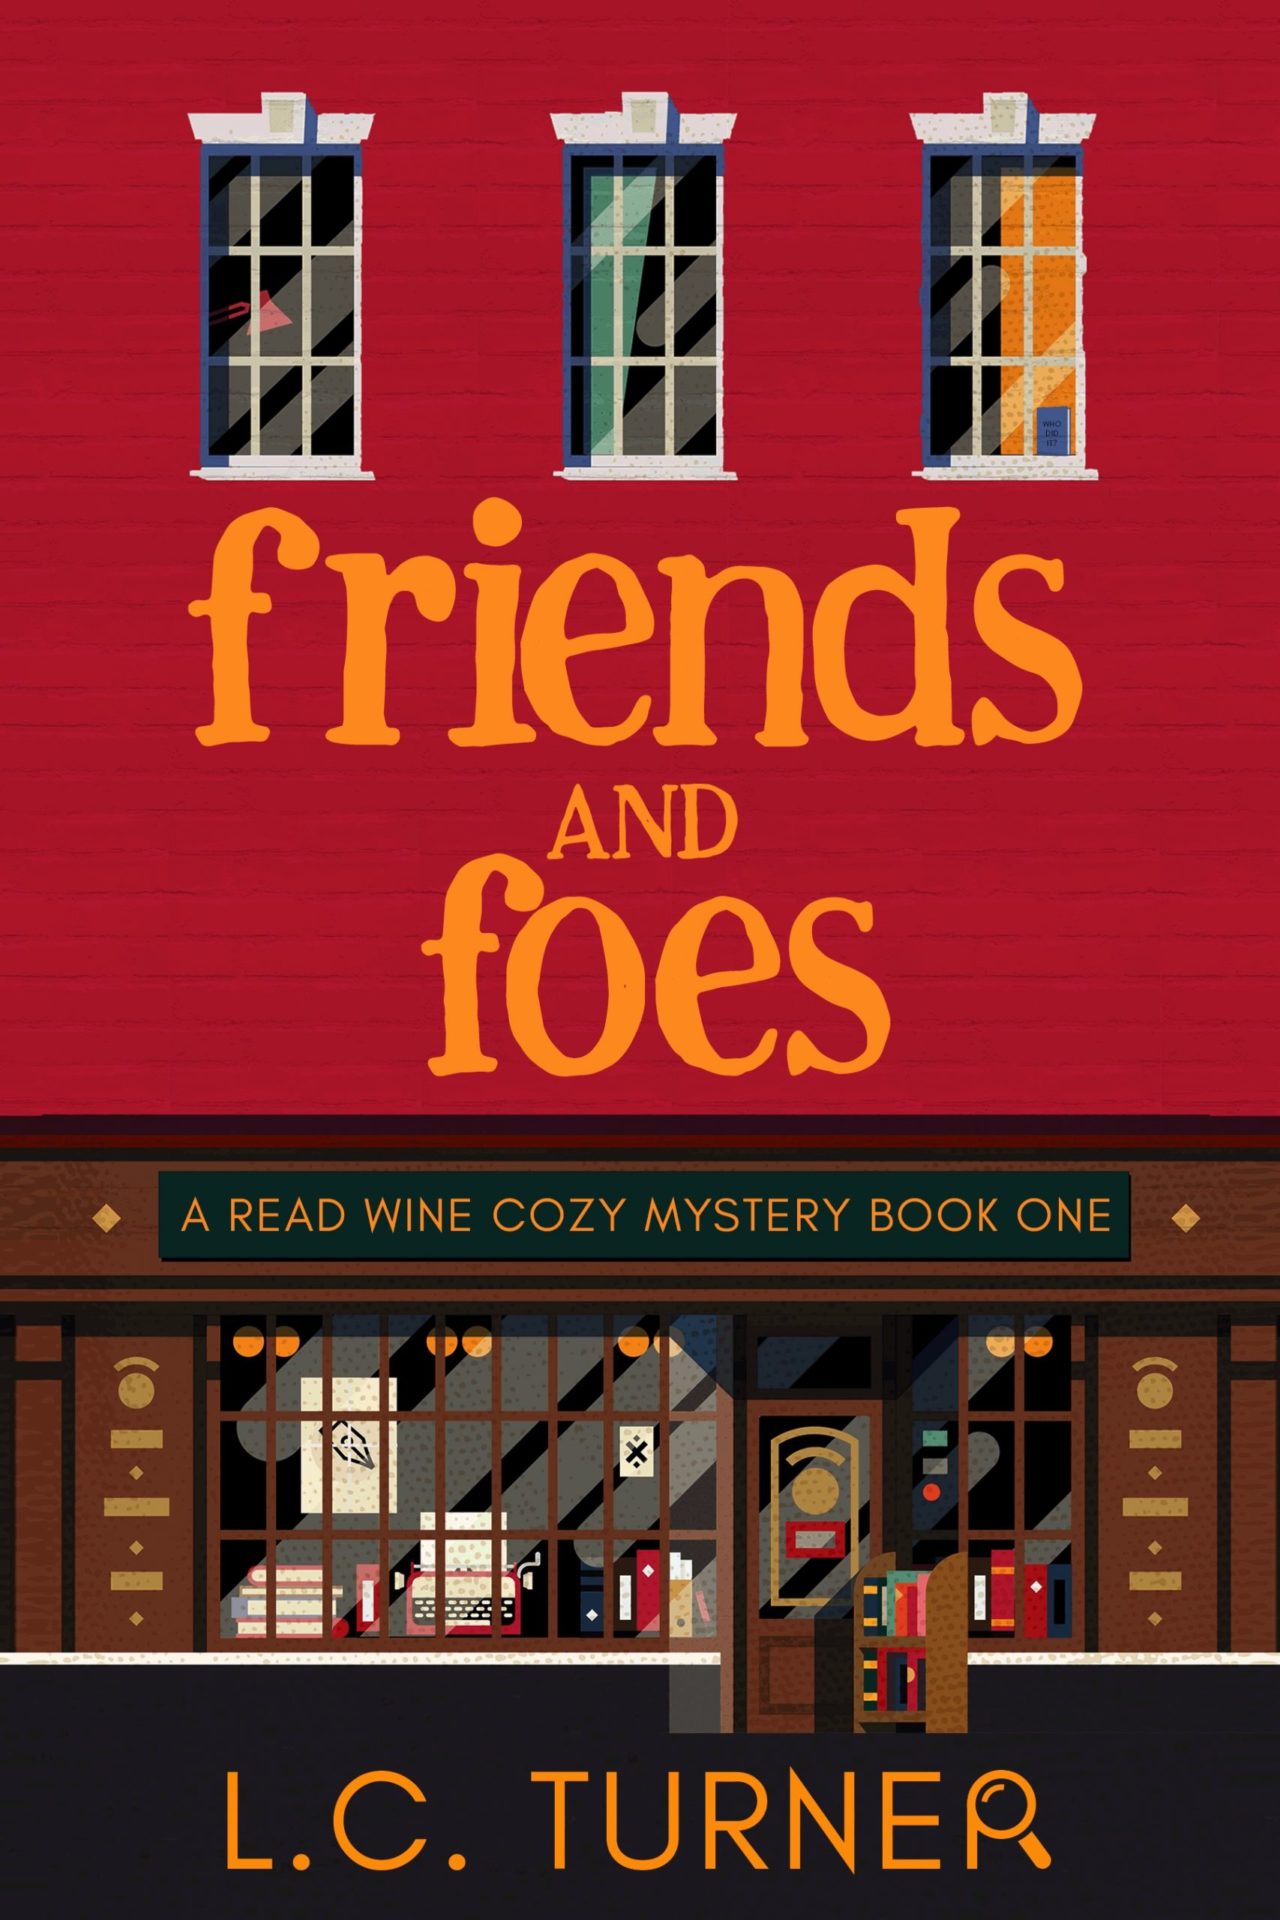 Friends and Foes – A Read Wine Bookstore Cozy Mystery Book 1